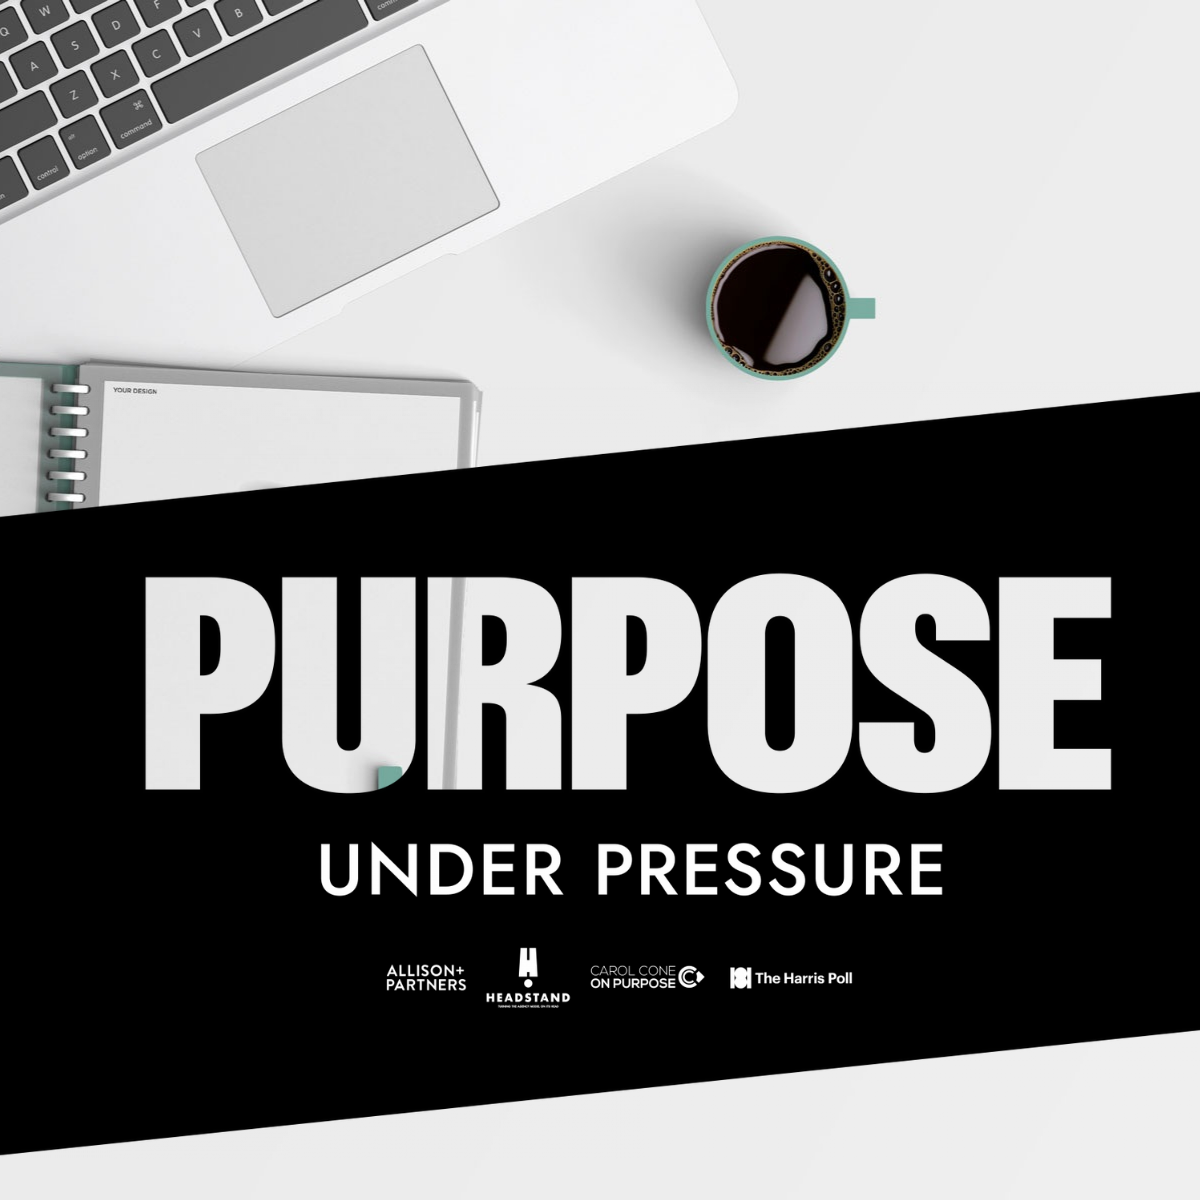 "Purpose Under Pressure" with black and white image of a computer and notebook